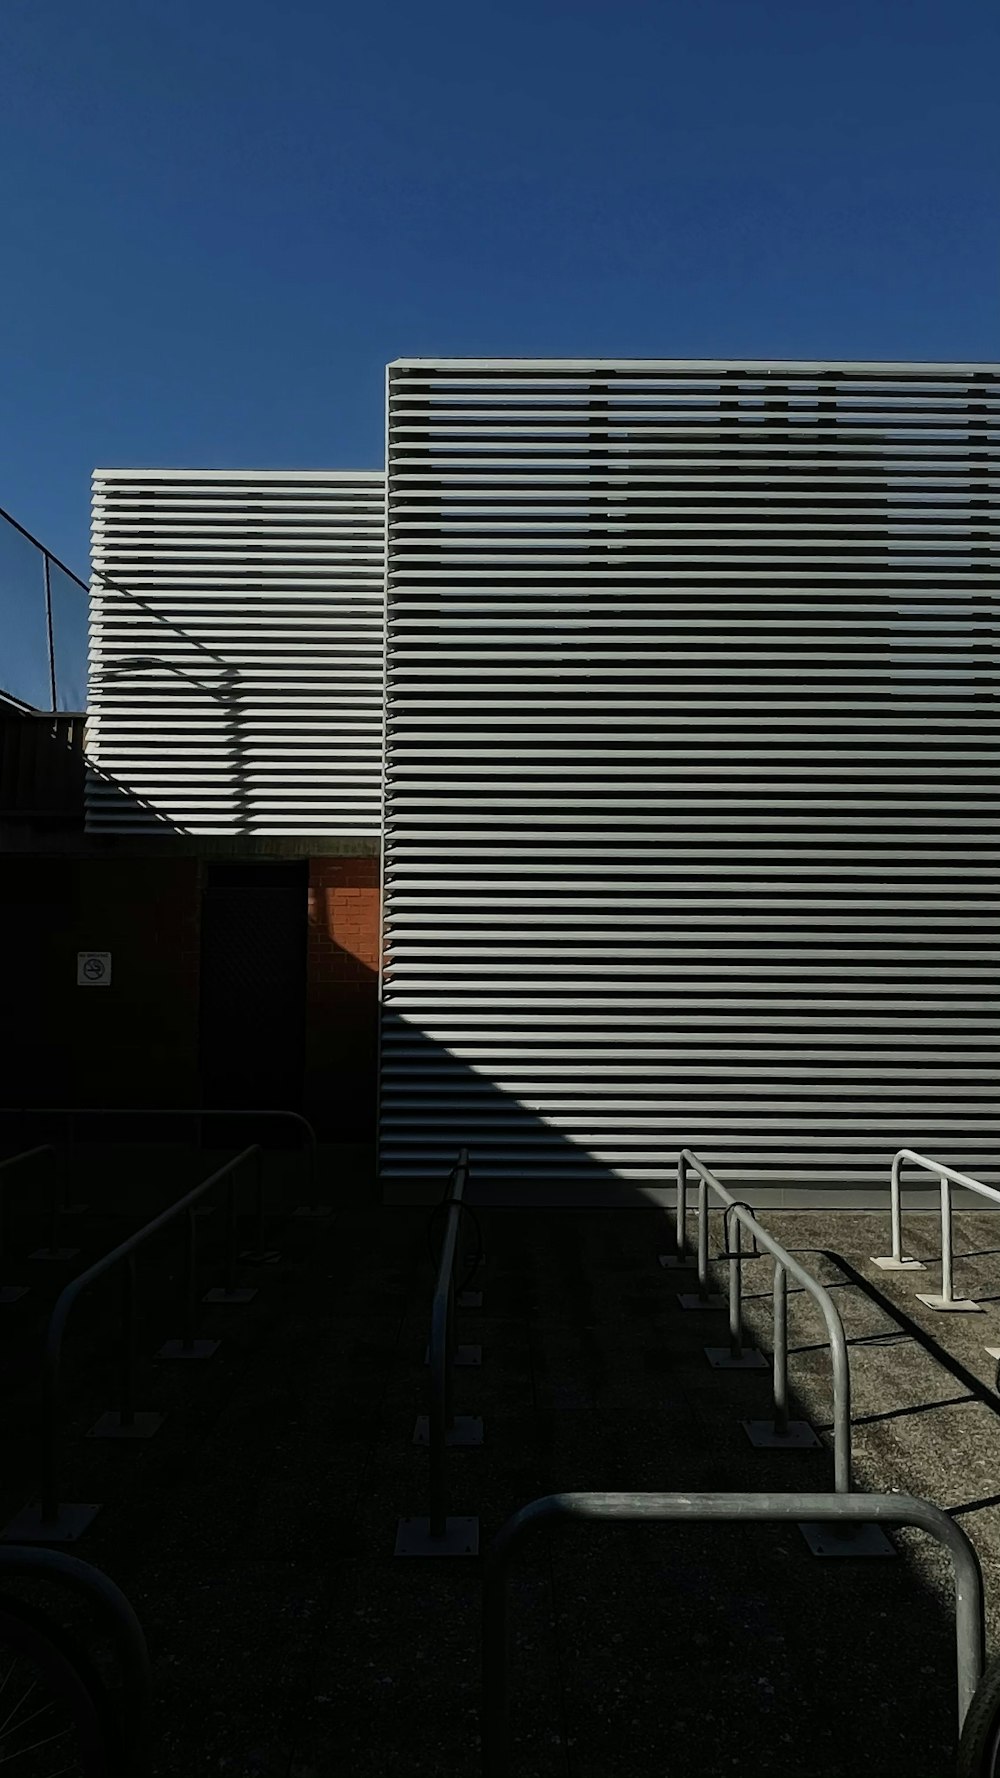 white metal railings near white and brown concrete building during daytime